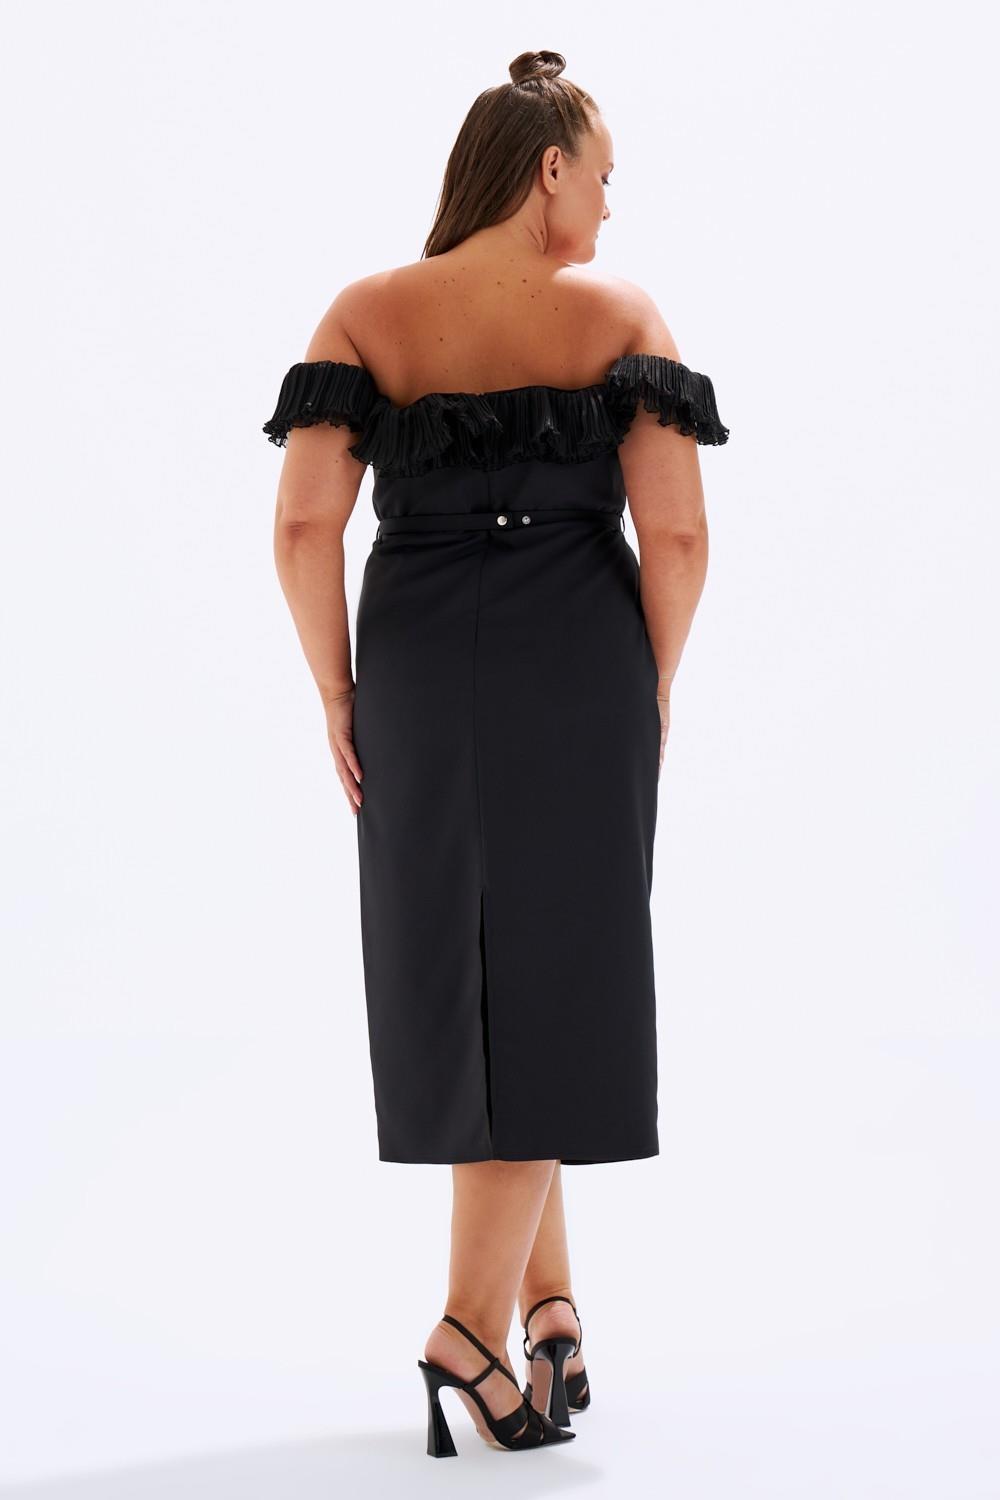 Bust Embroidered Plus Size Evening Dress